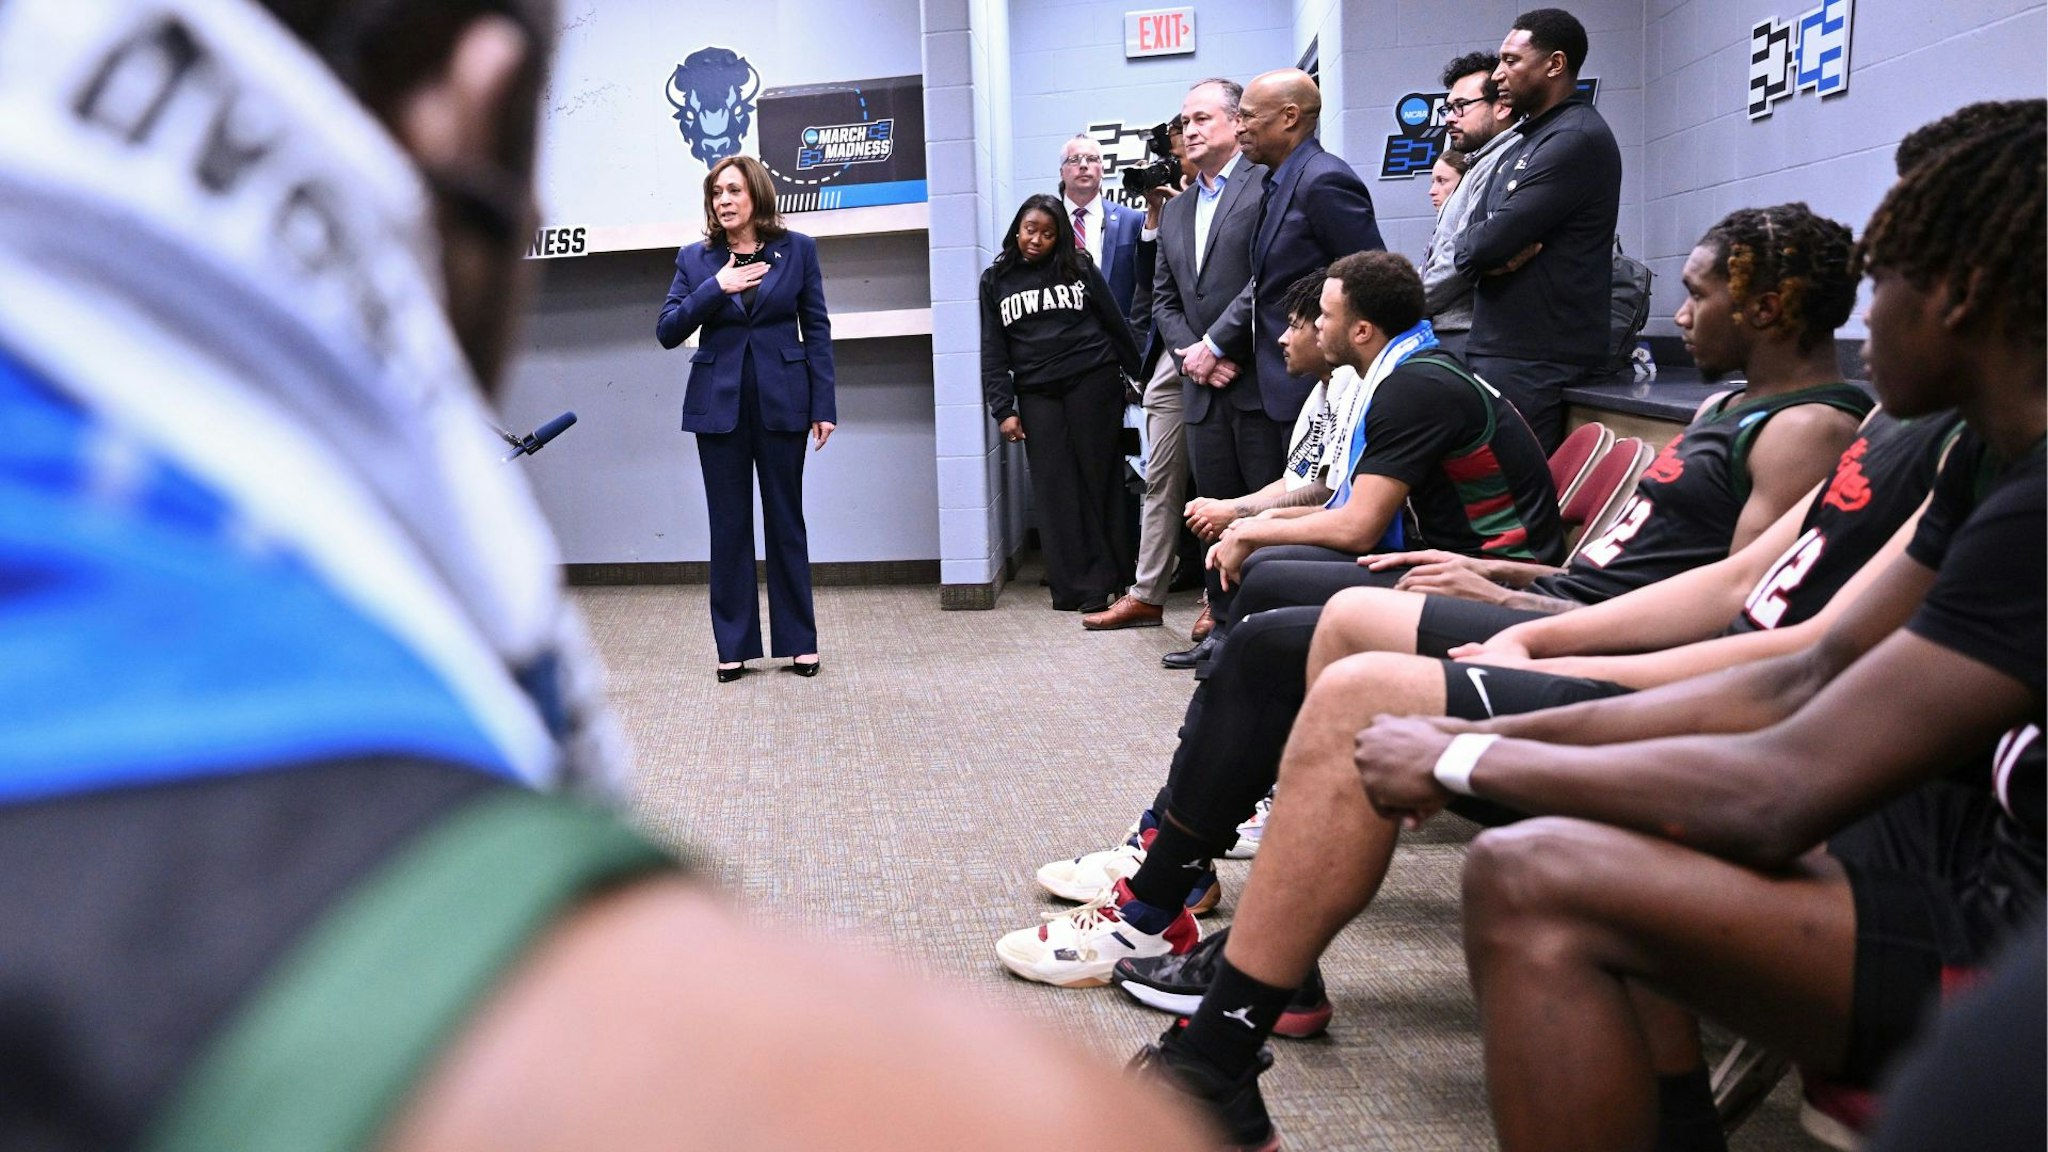 DES MOINES, IA - MARCH 16: U.S. Vice President Kamala Harris and her husband Douglas Emhoff visit the Howard Bison locker room following their 96-68 loss to the Kansas Jayhawks during the first round of the 2023 NCAA Men's Basketball Tournament held at Wells Fargo Arena on March 16, 2023 in Des Moines, Iowa.